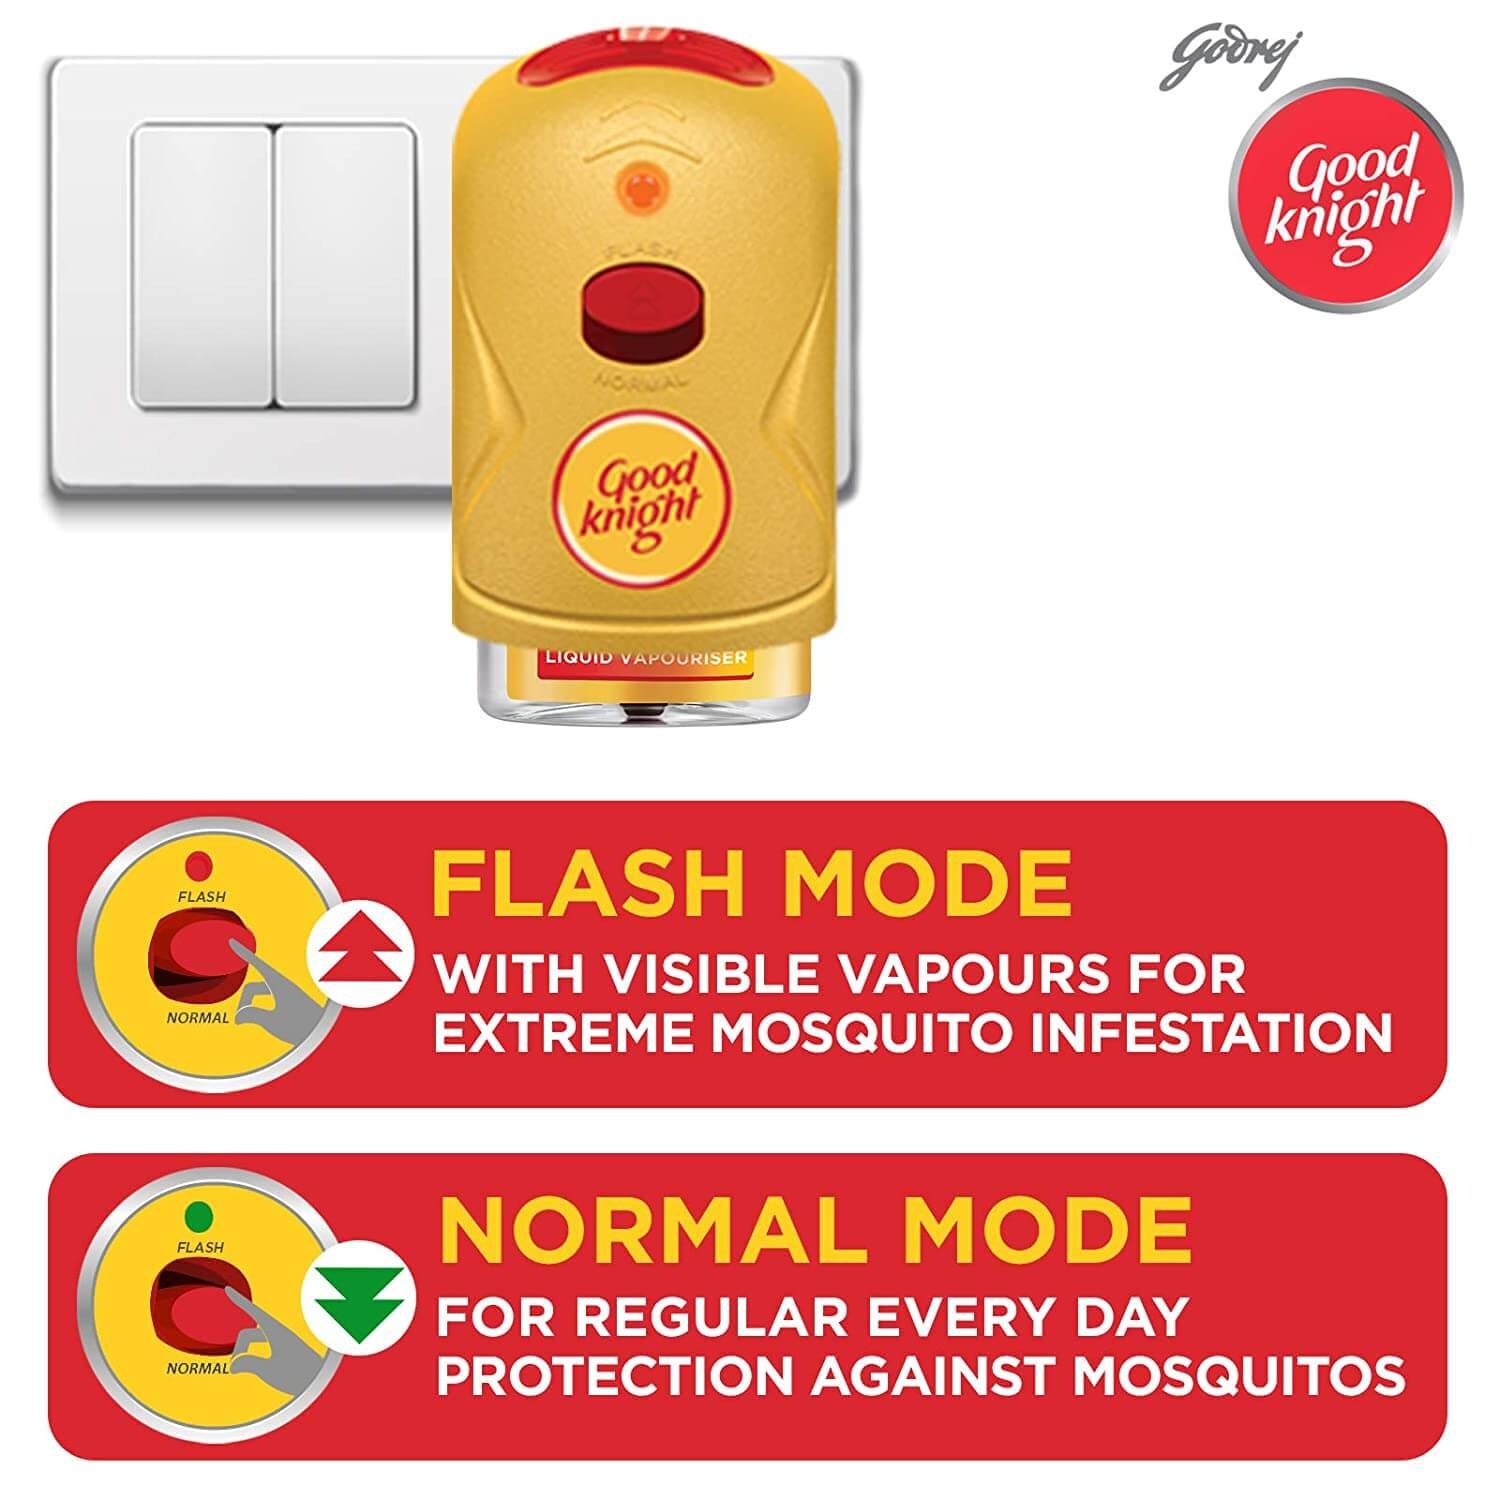 https://shoppingyatra.com/product_images/Good knight Gold Flash - Mosquito Repellent Combo Pack (Machine + 3 Refills), 4Pcs1.jpg